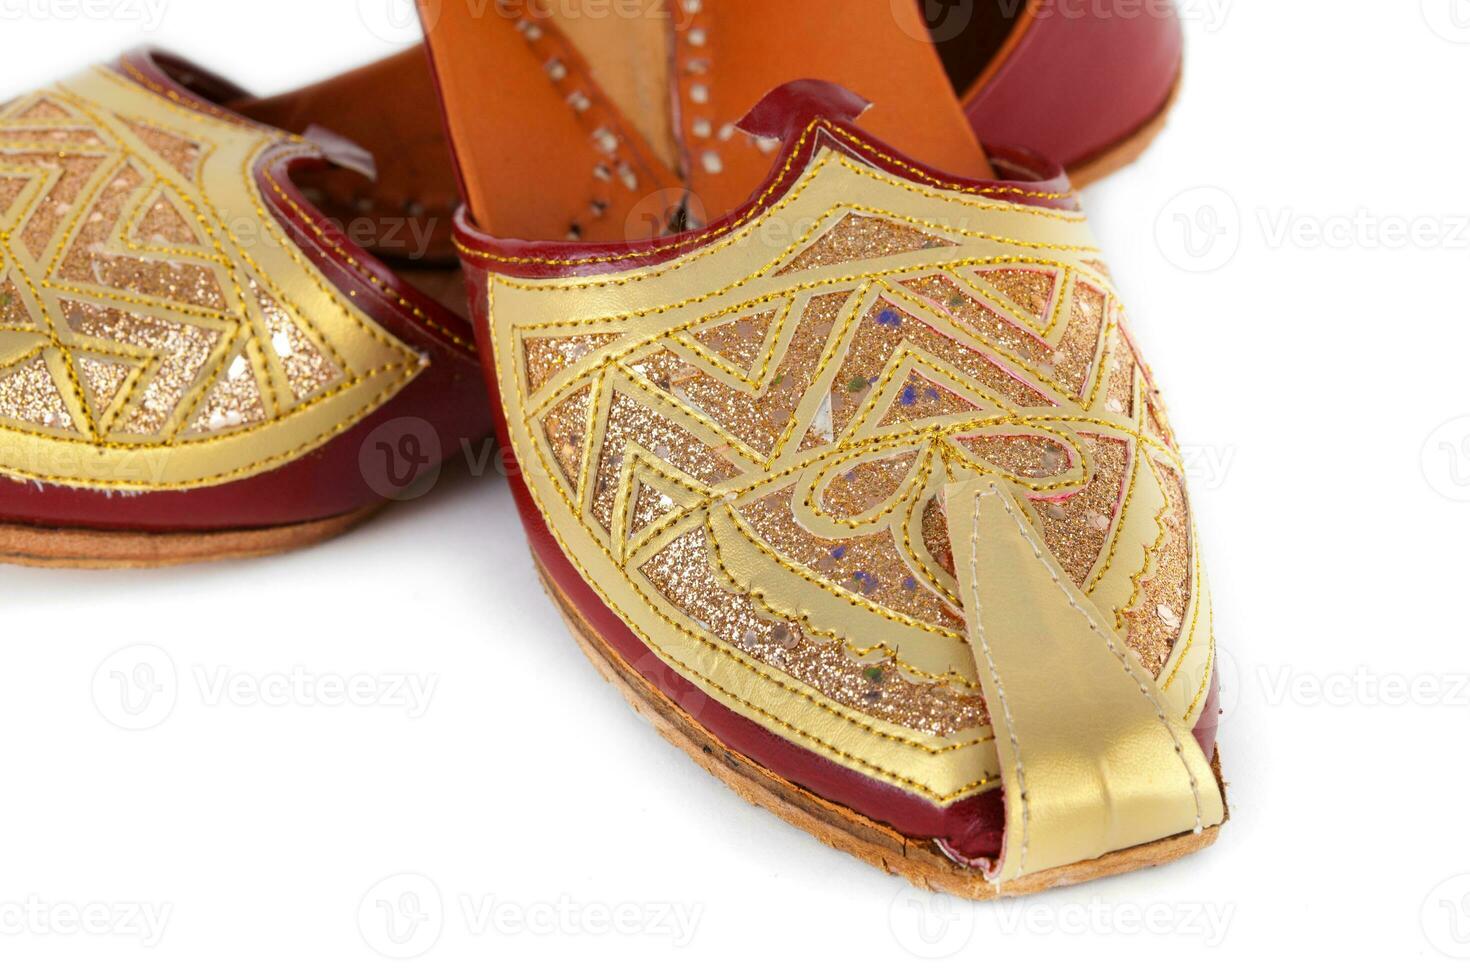 Pair of traditional Indian shoes photo